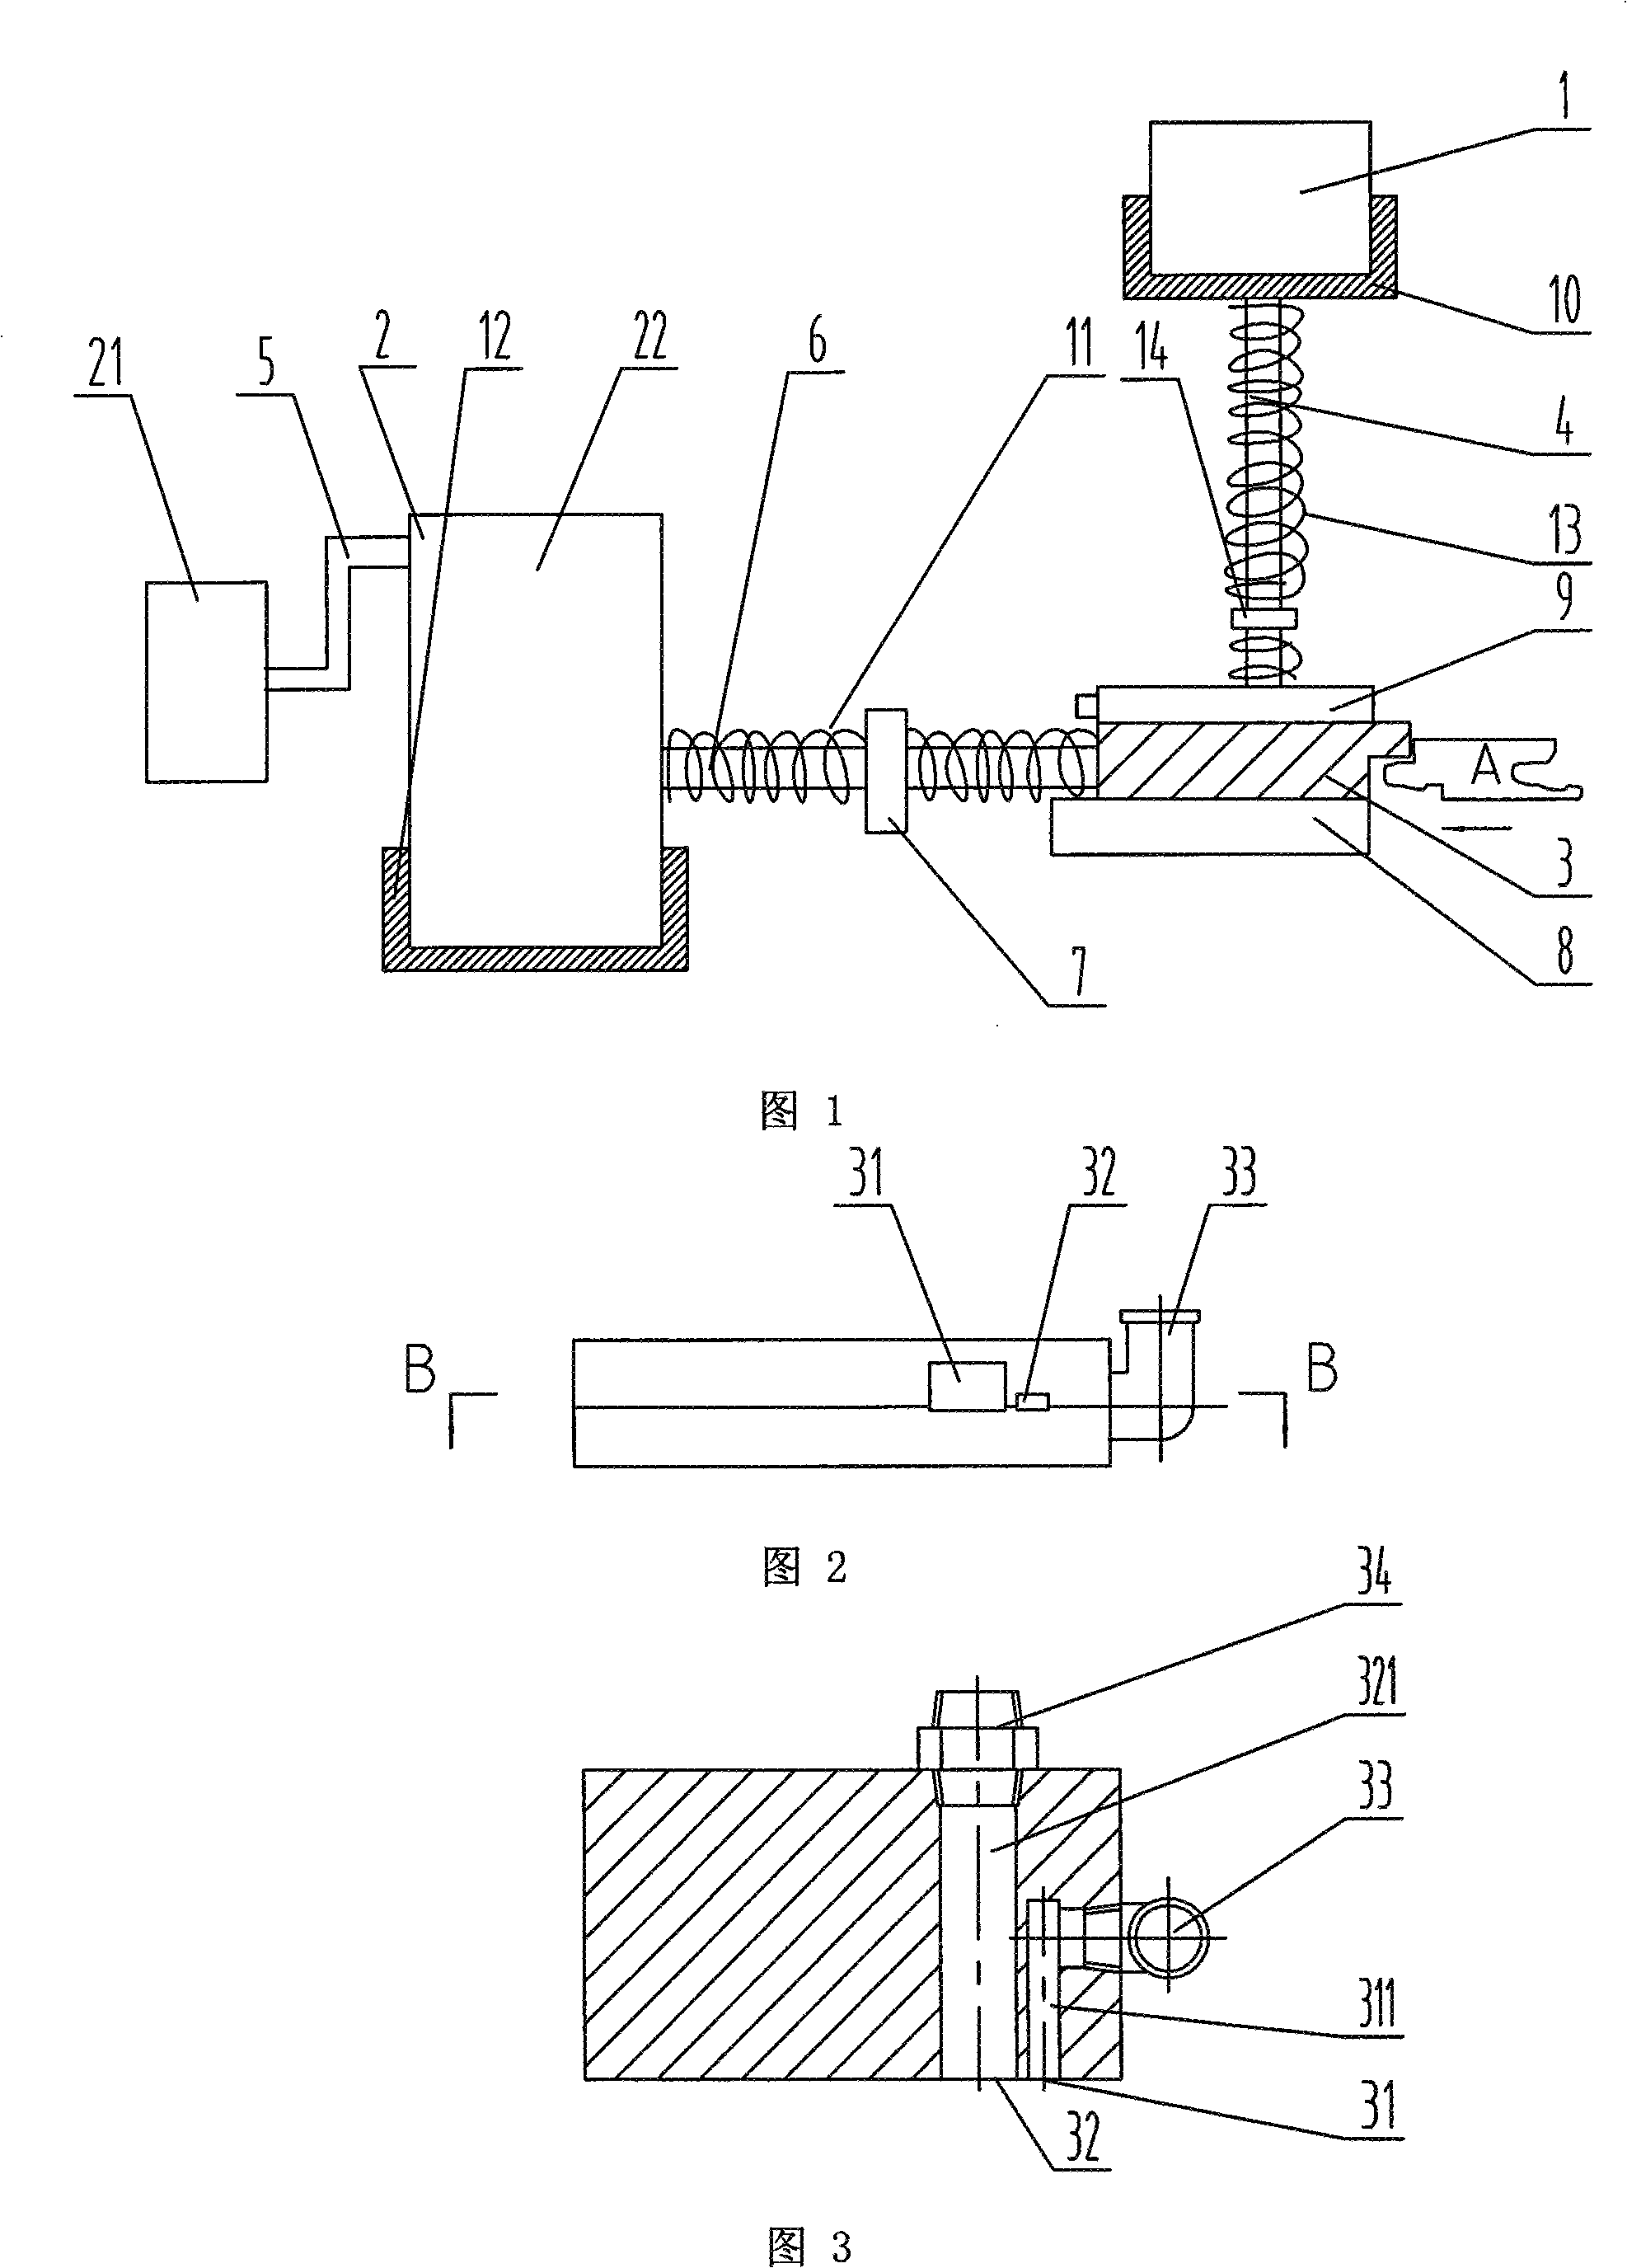 Apparatus for waxing on groove and tongue side surface on composite floor board